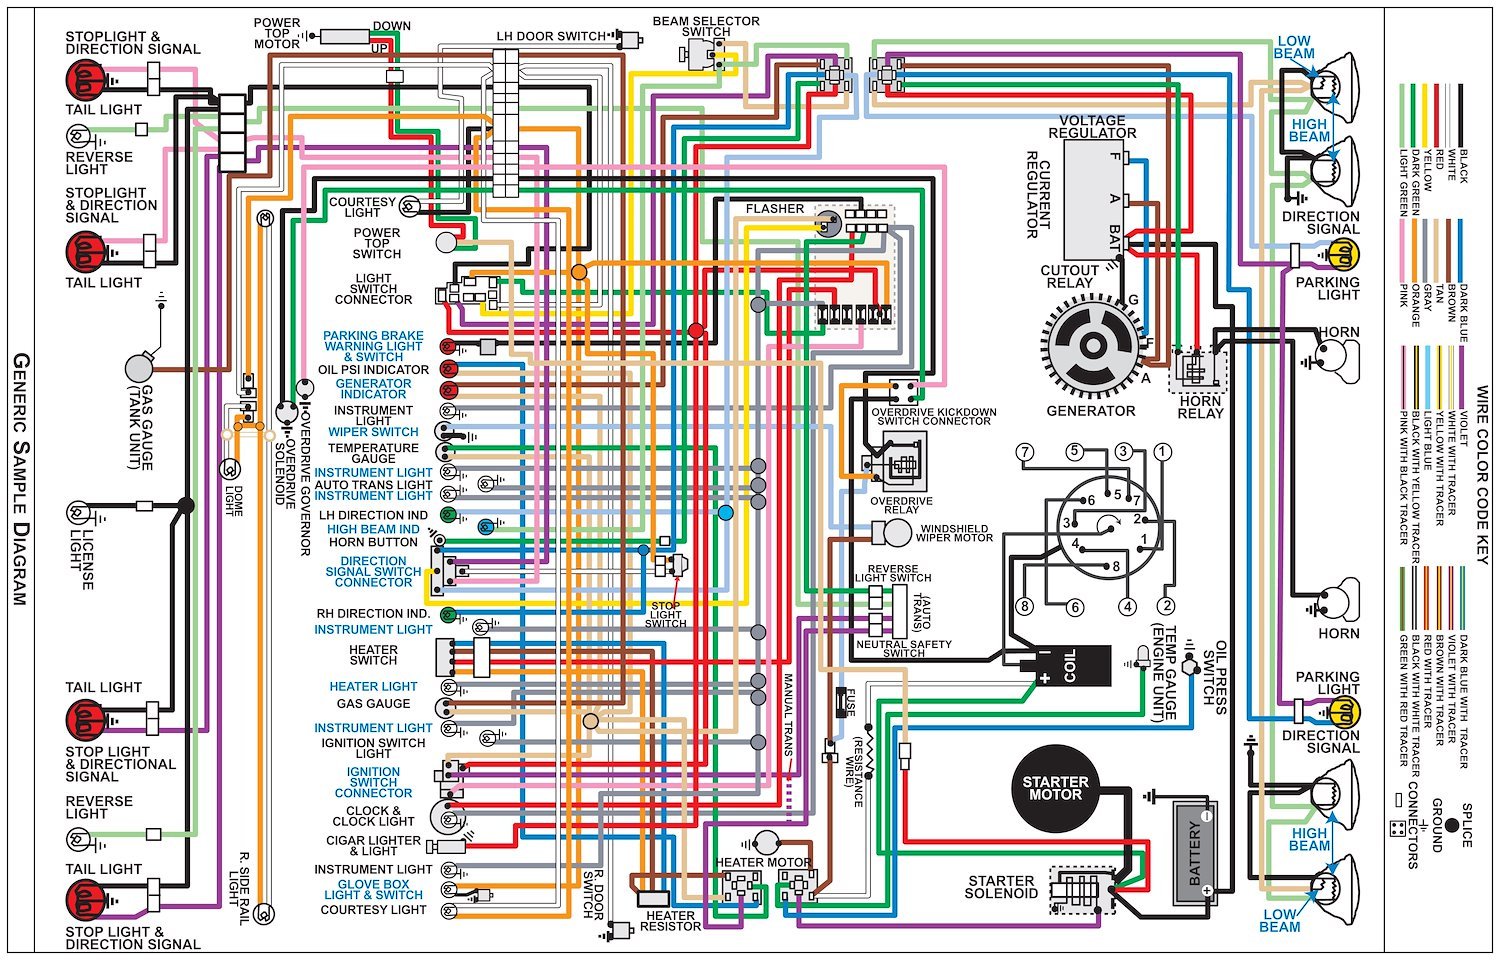 Wiring Diagram for 1971 GMC Sprint, 11 in. x 17 in., Laminated